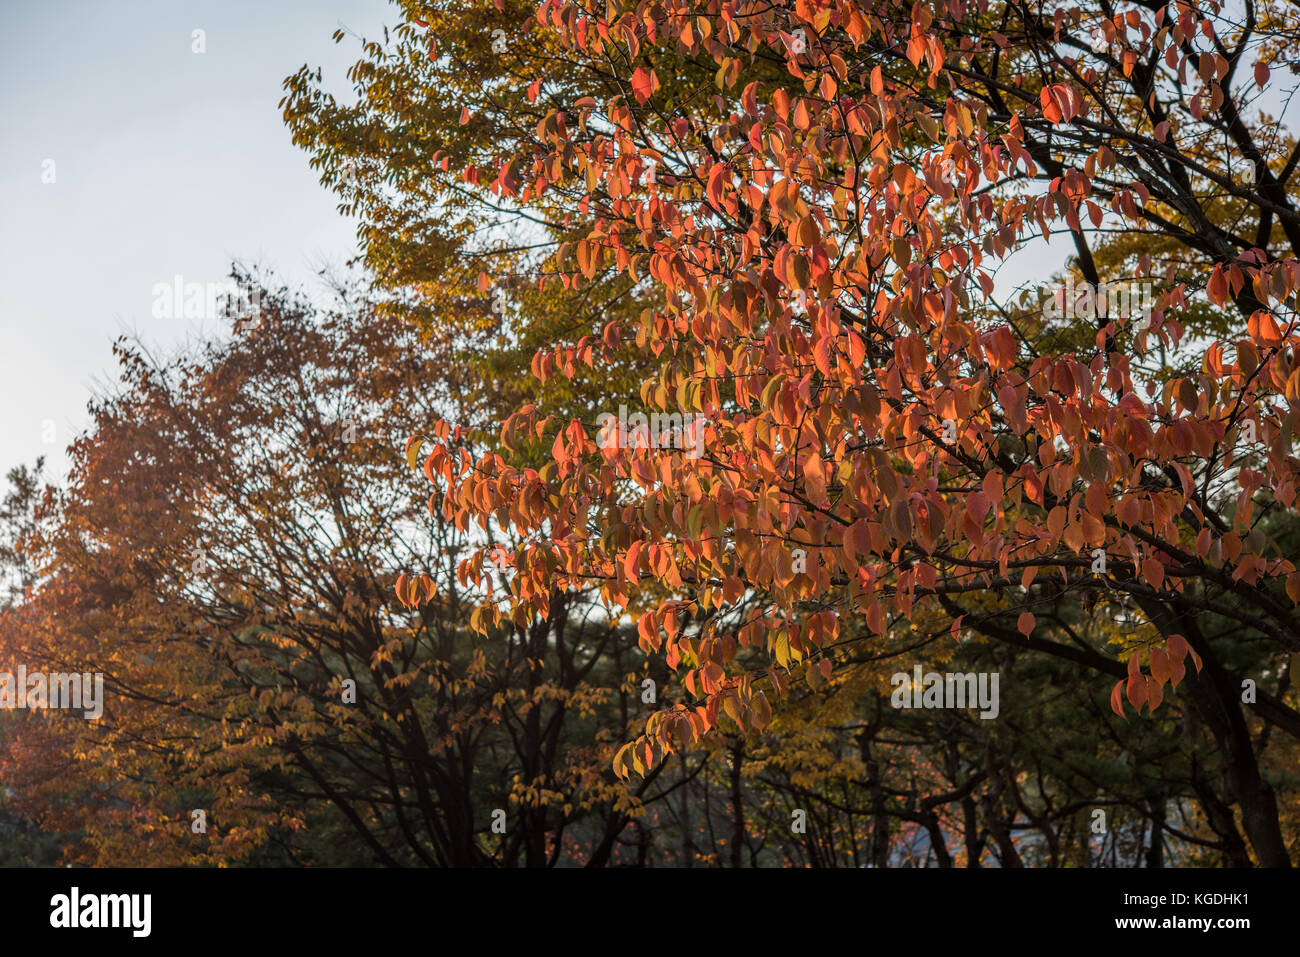 Leaves on trees turning red in the autumn season. Stock Photo